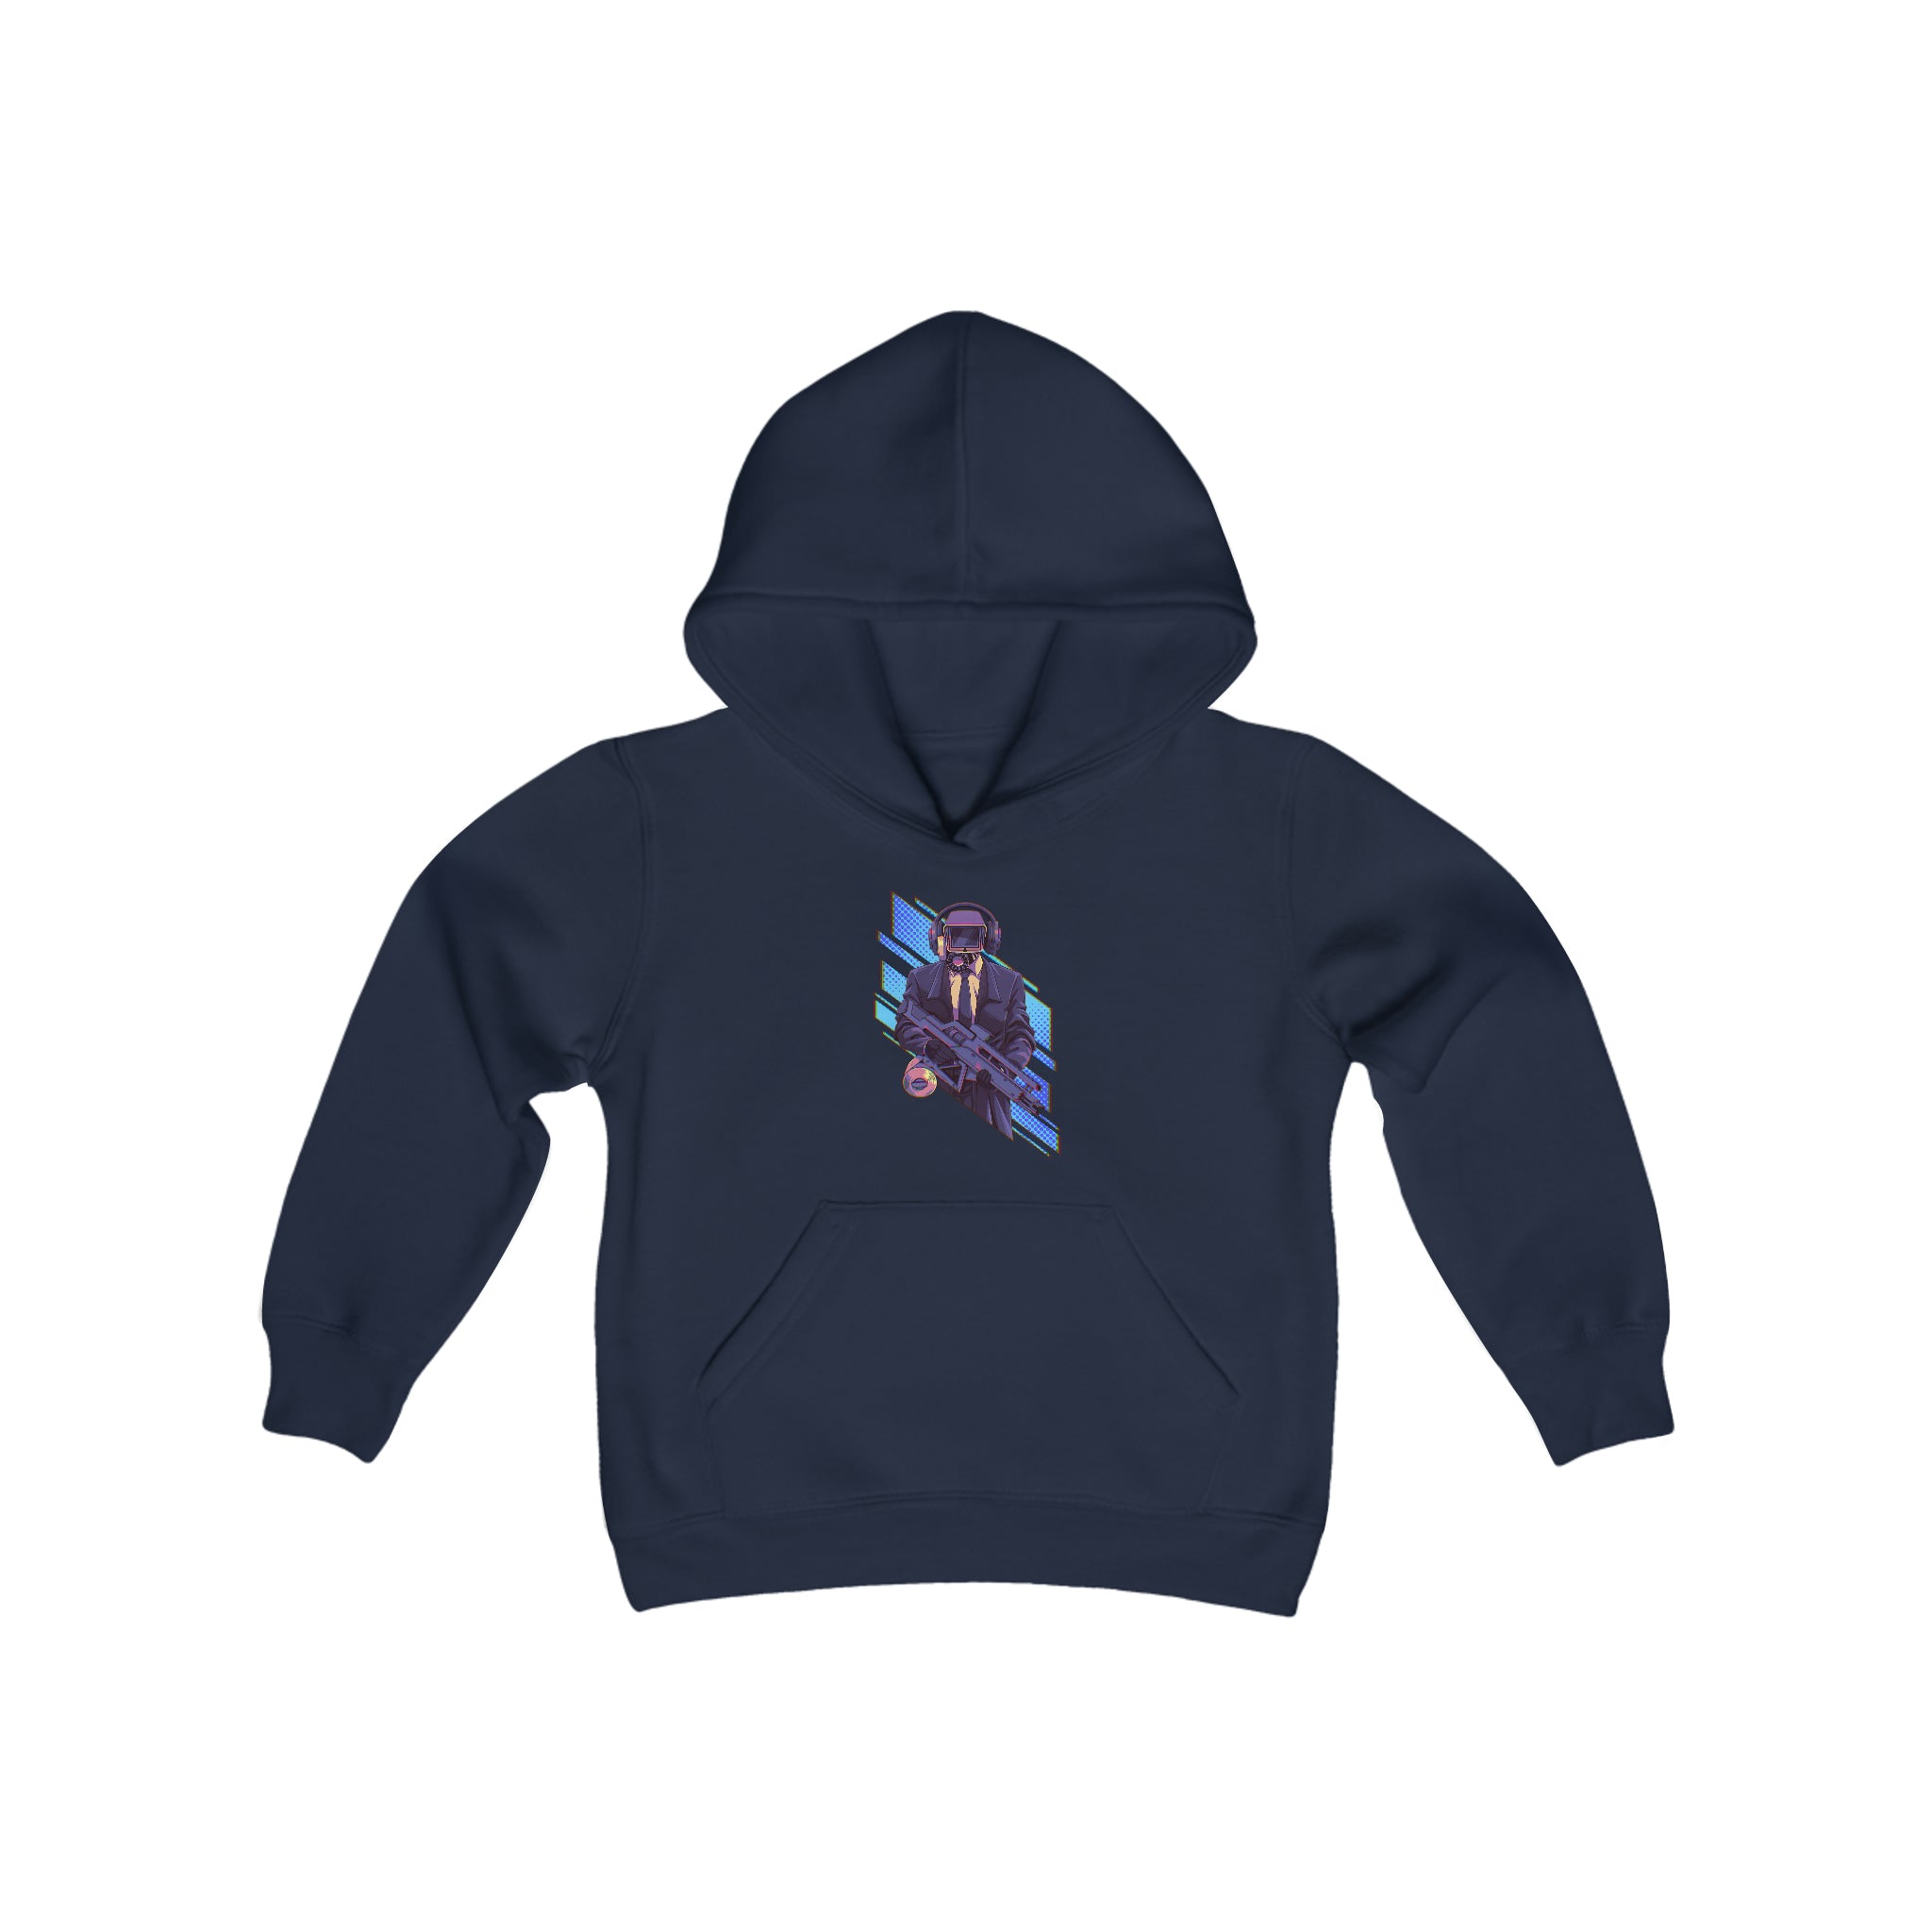 Cybercam Hoodie - Youth